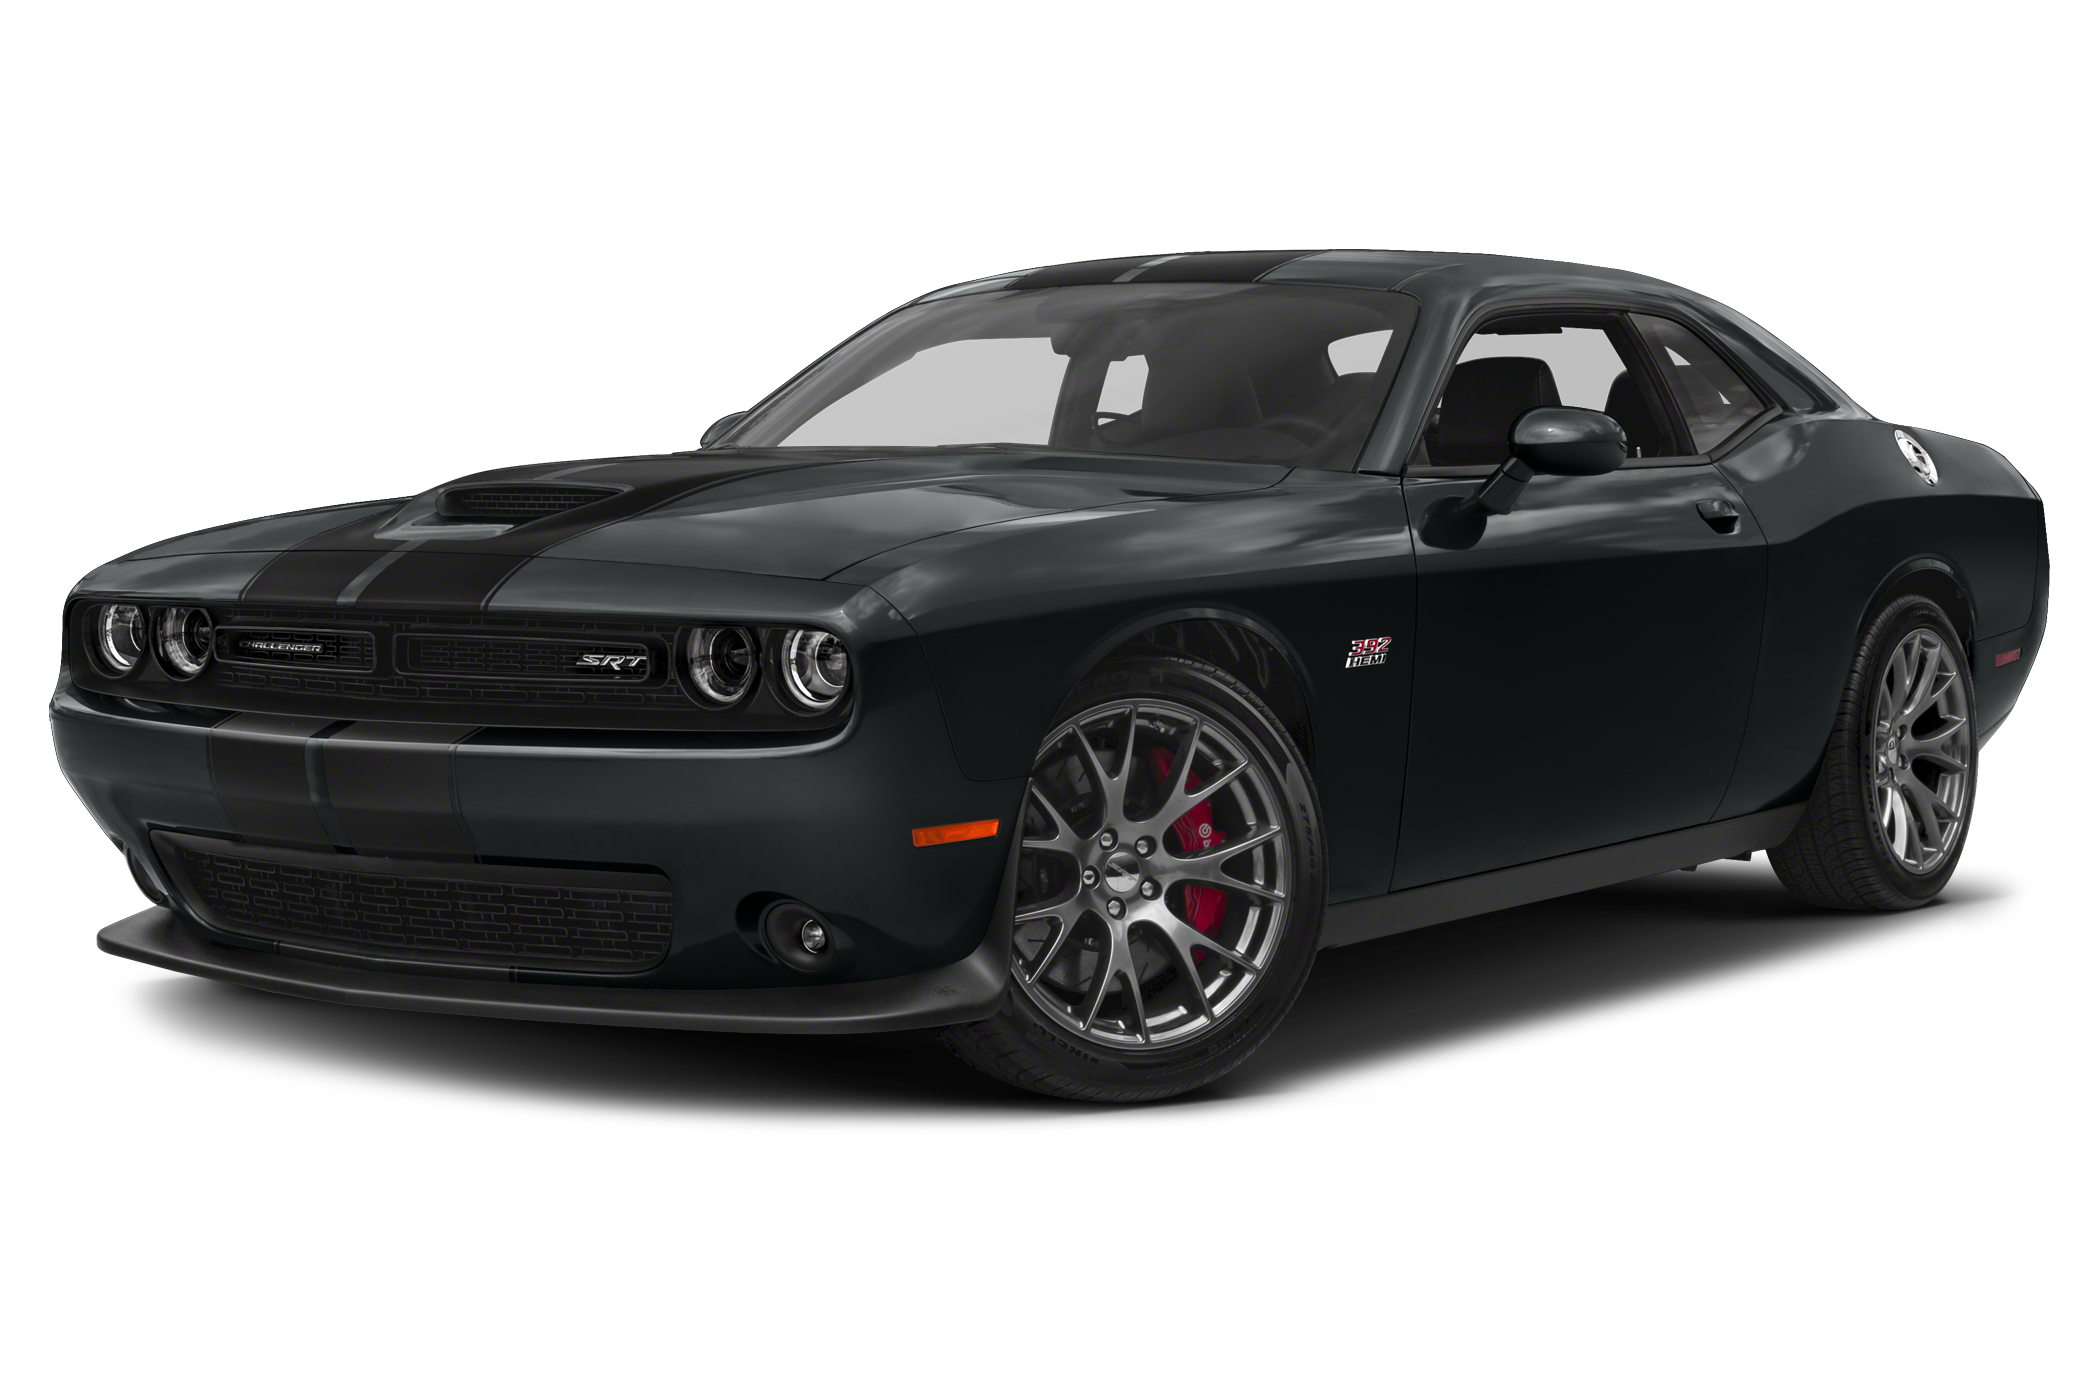 Used 2015 Dodge Challenger For Sale Near Me